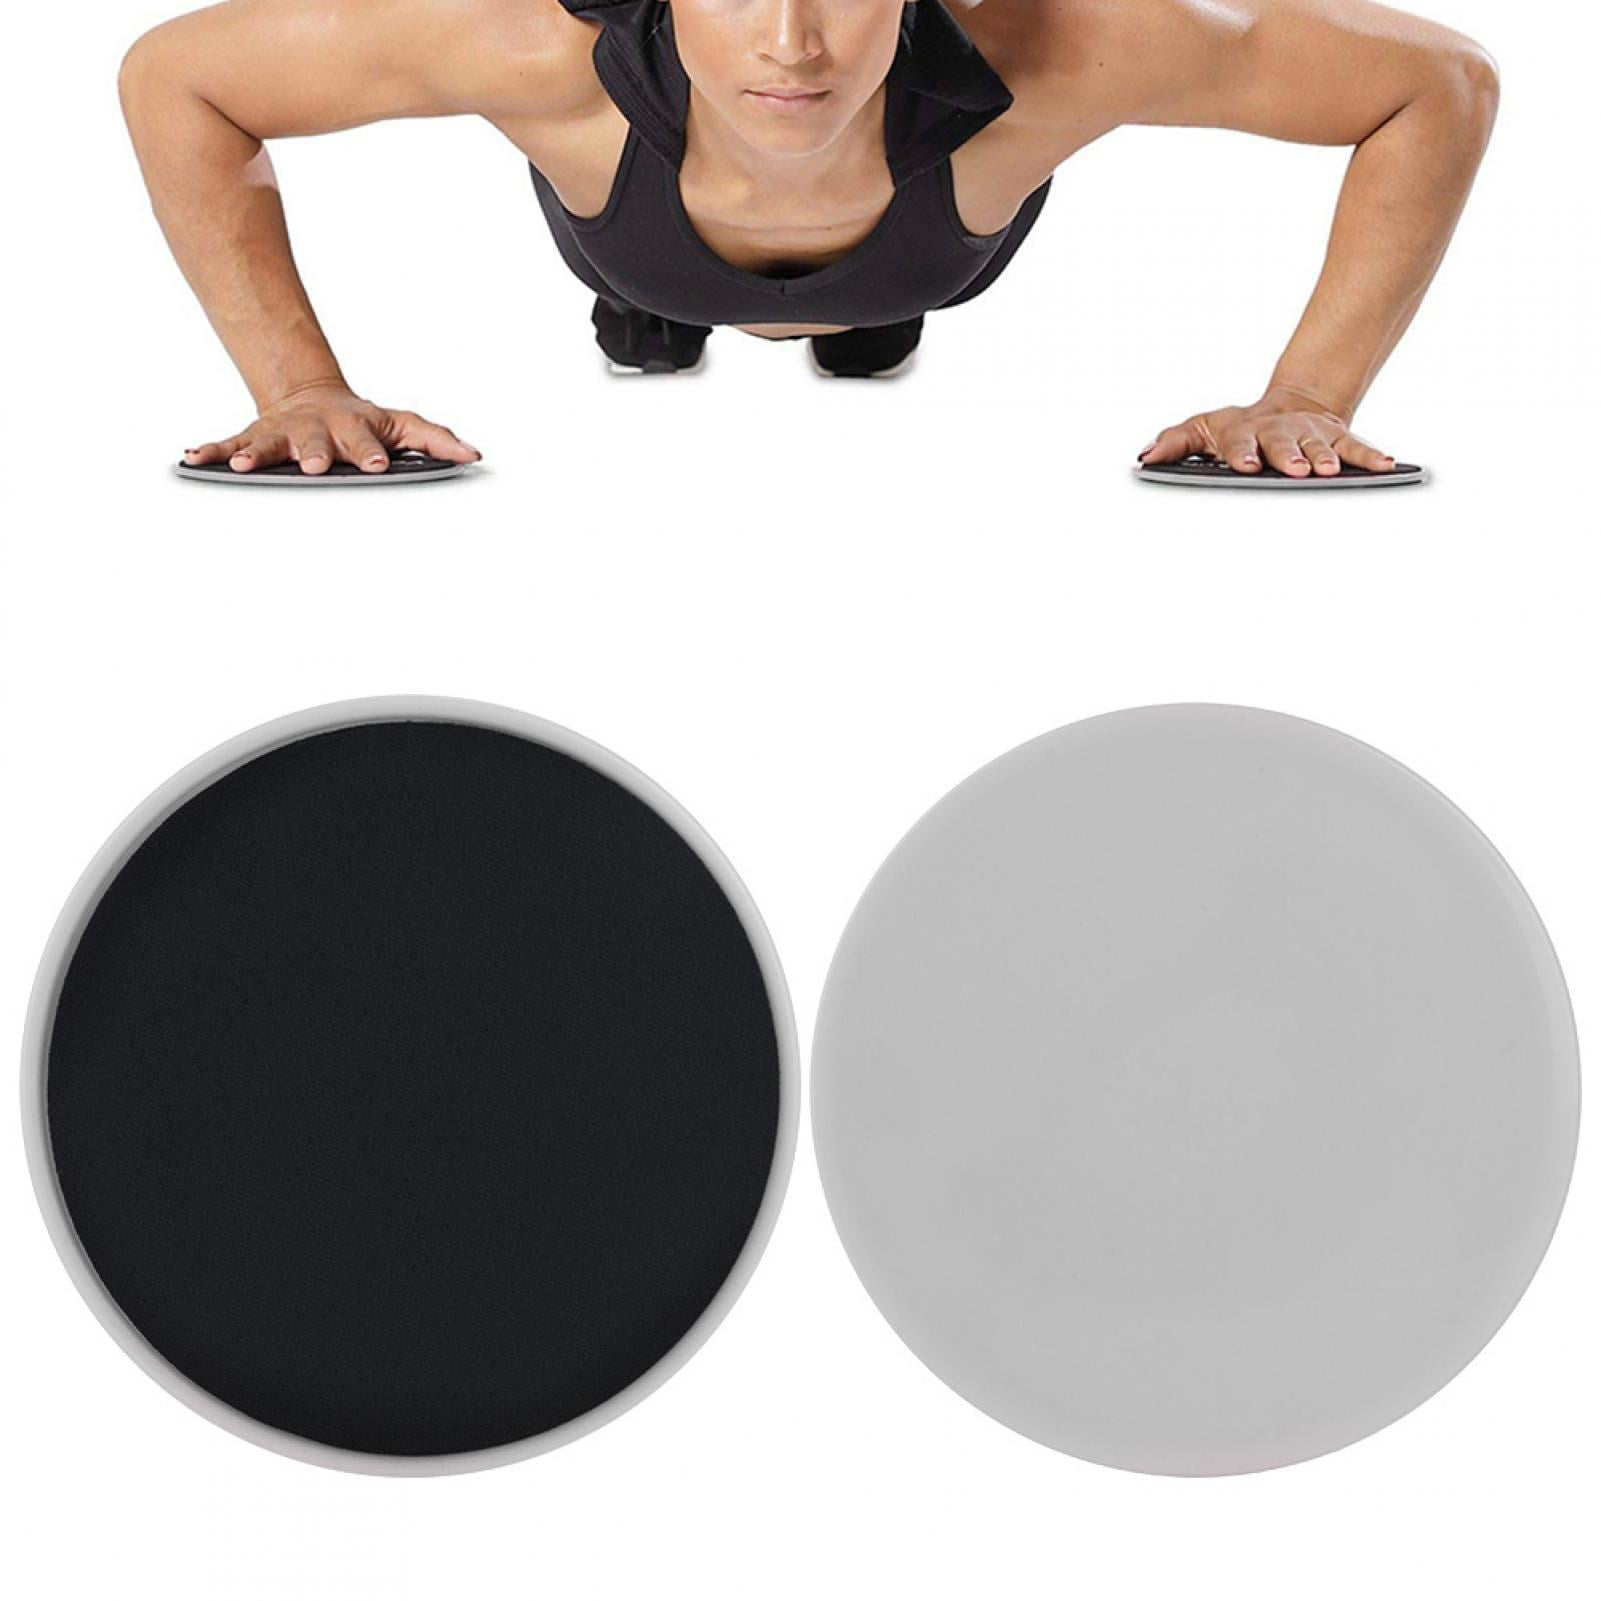 Aptoco Core Exercise Workout Sliders (Set of 4), Smooth Gliders